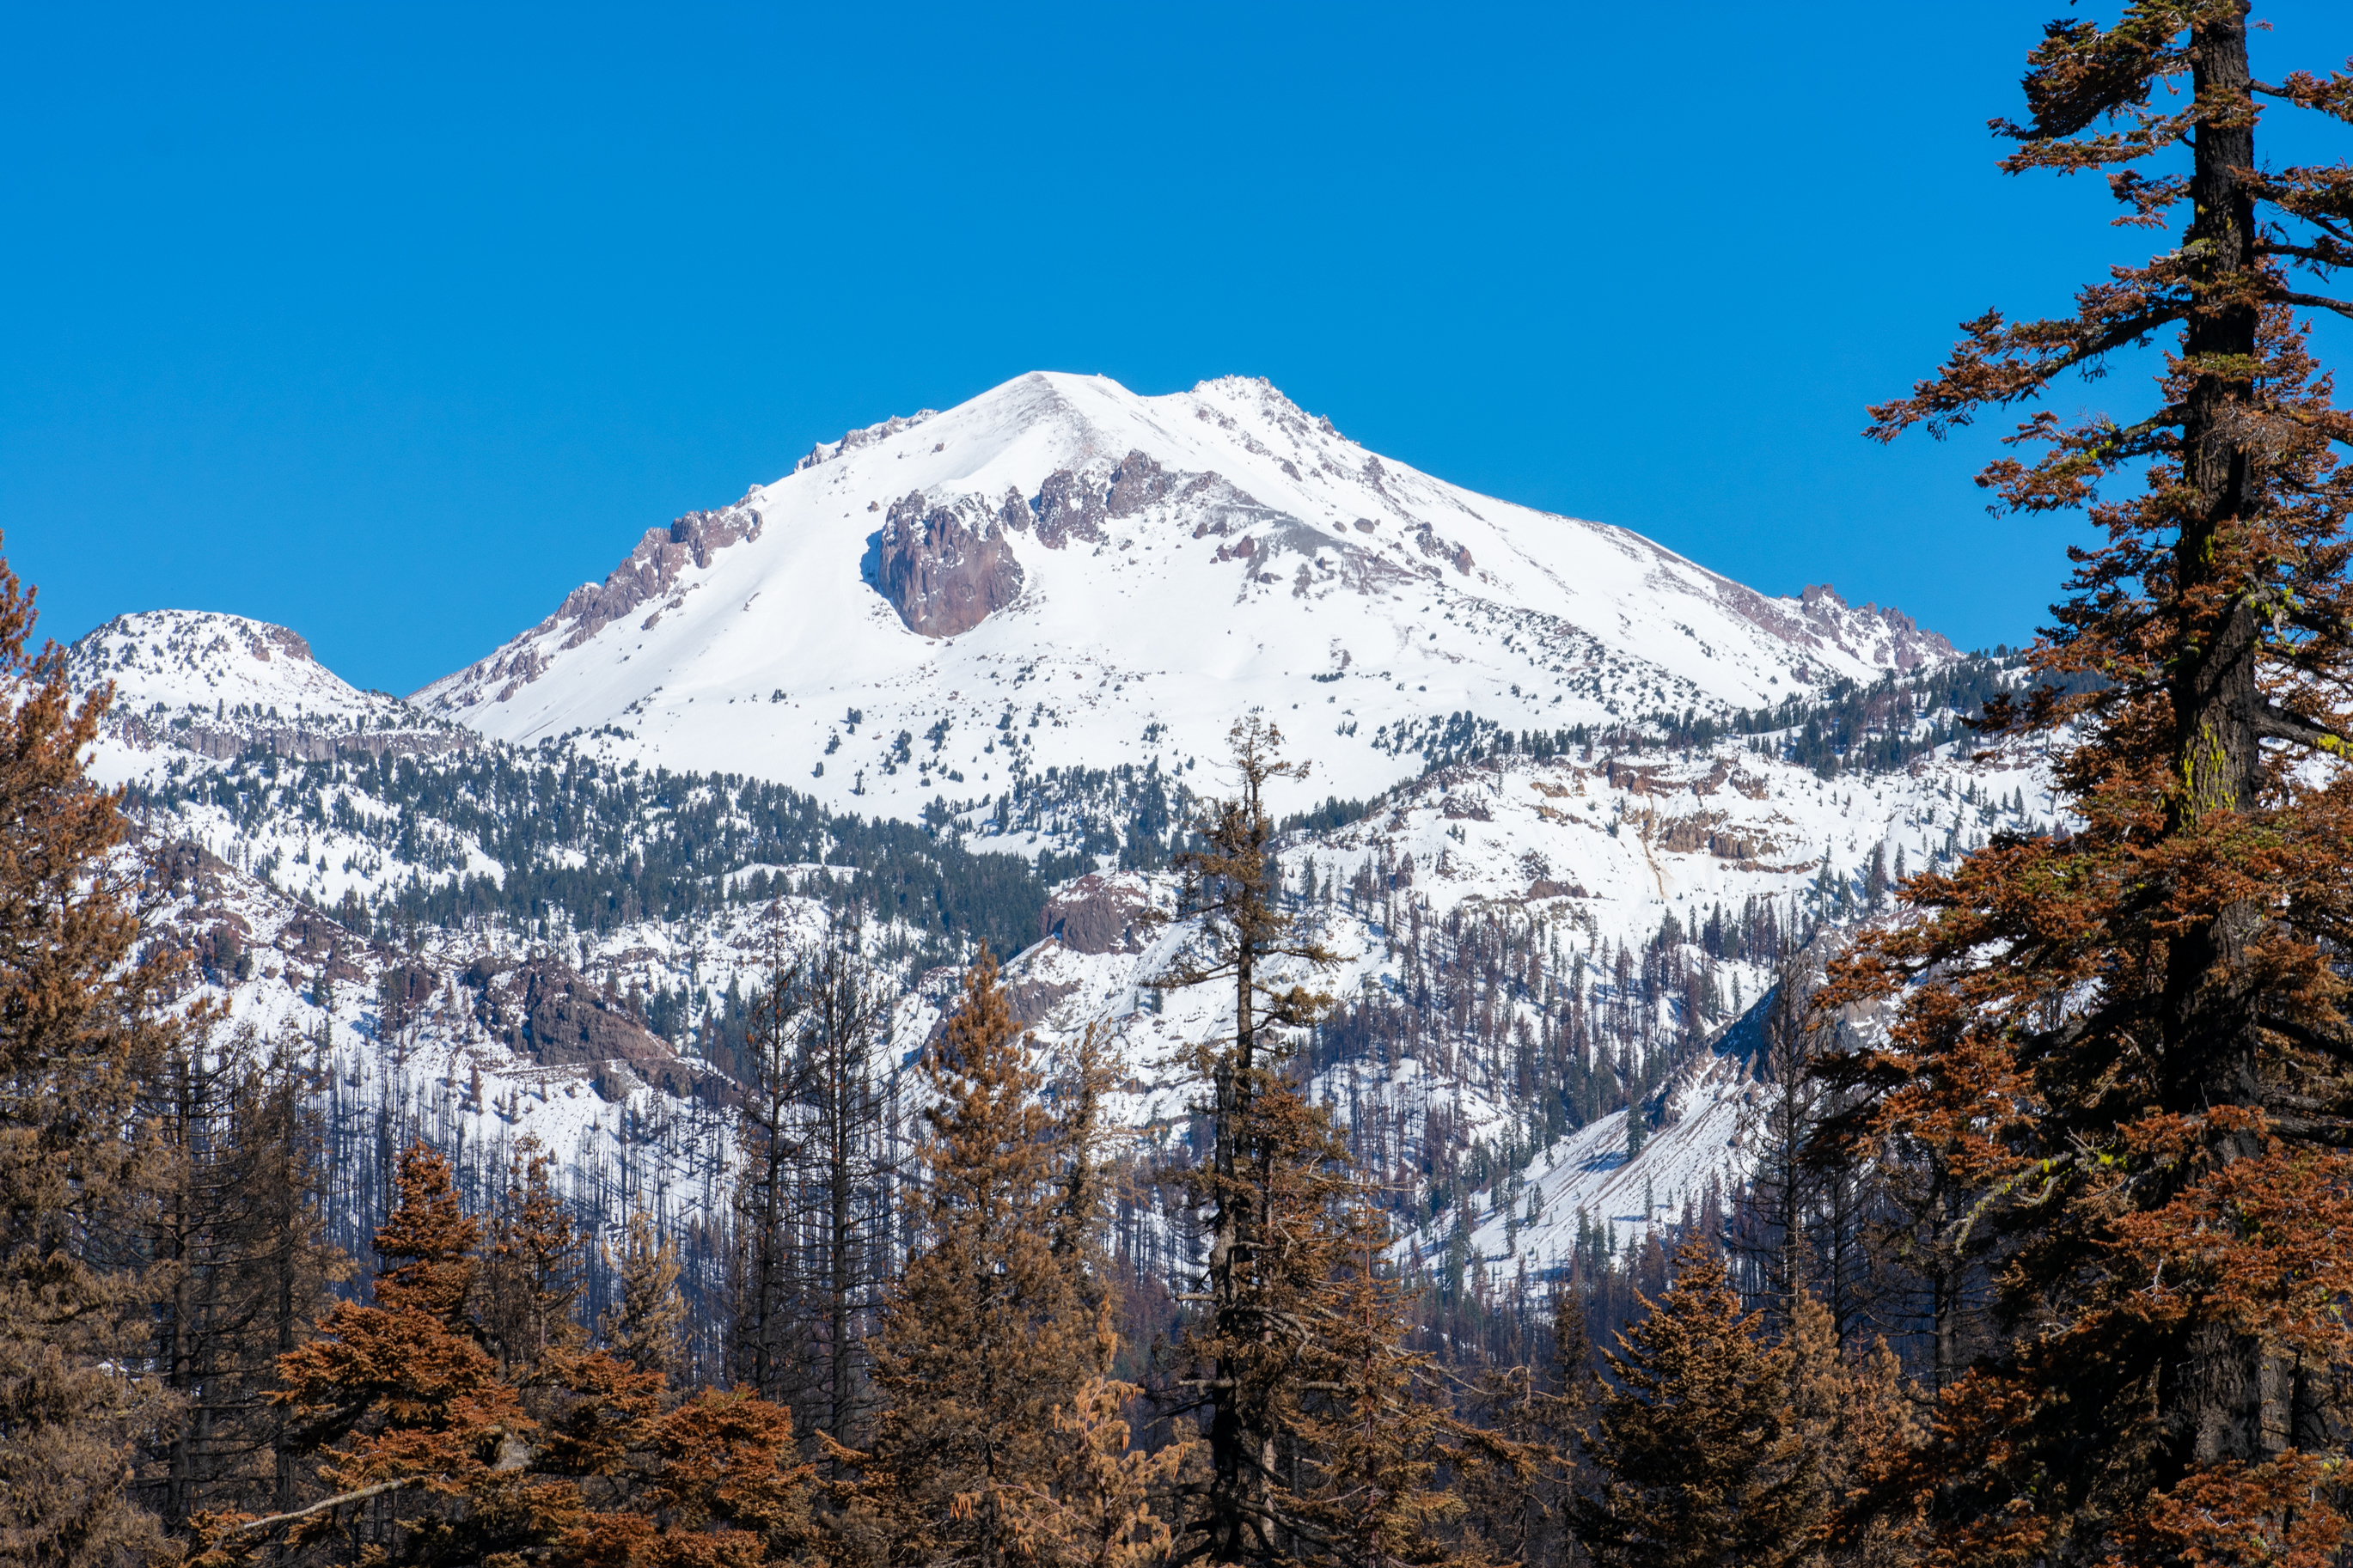 A photo zoomed in on a snow-covered volcanic peak. Burned trees frame the bottom and sides of the image.